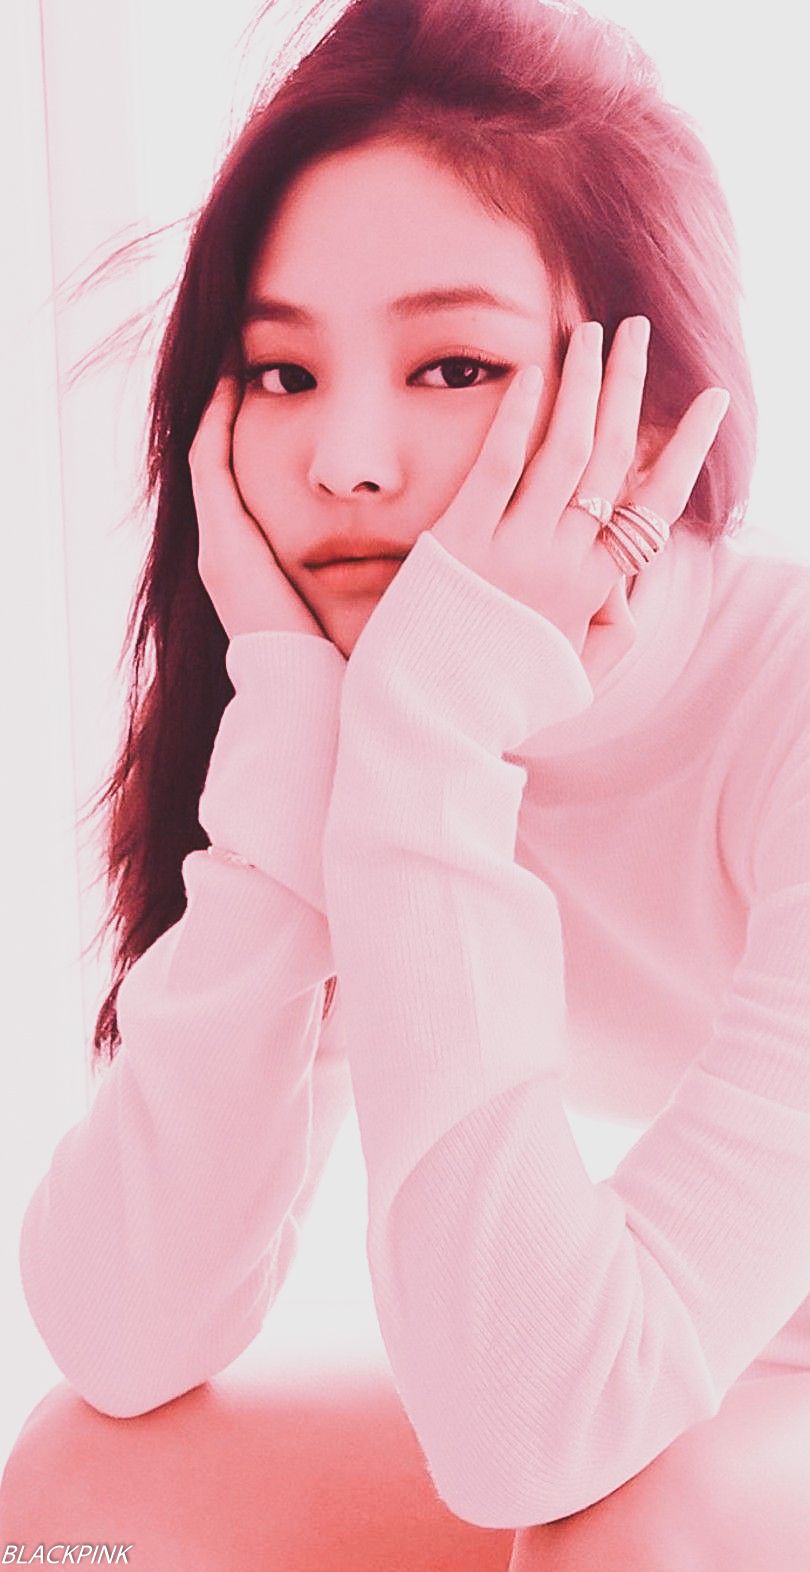 Jennie Pic Wallpapers - Wallpaper Cave